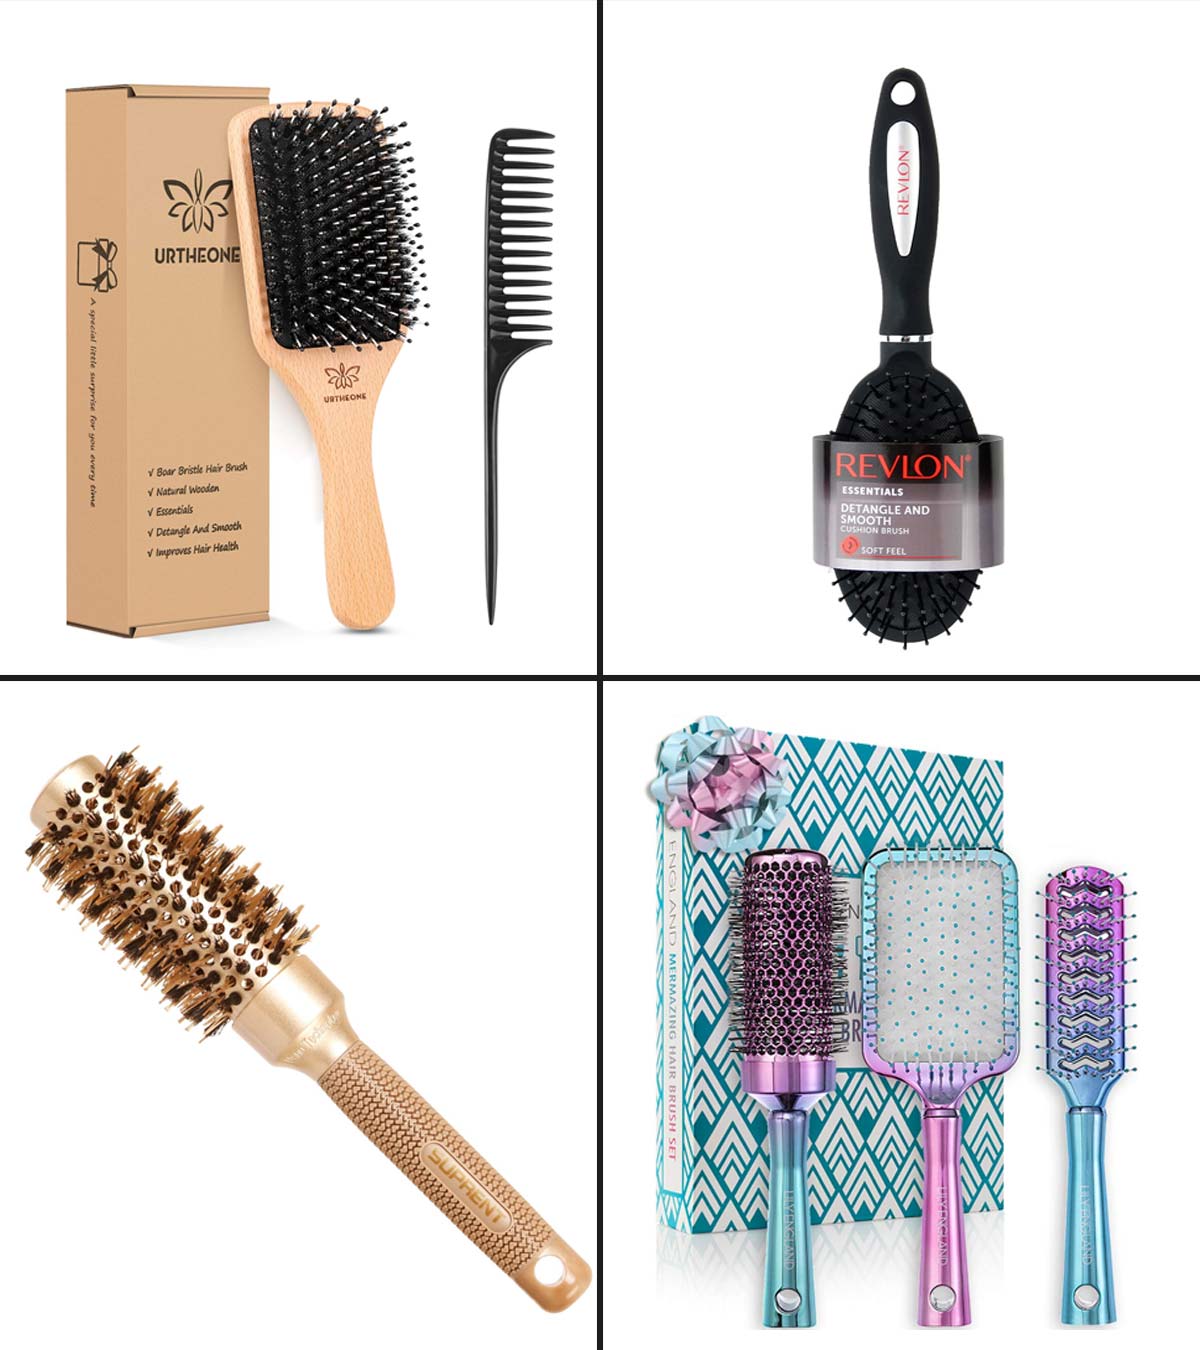 How to Clean a Hairbrush: 6 Simple Steps for Cleaning Hairbrushes